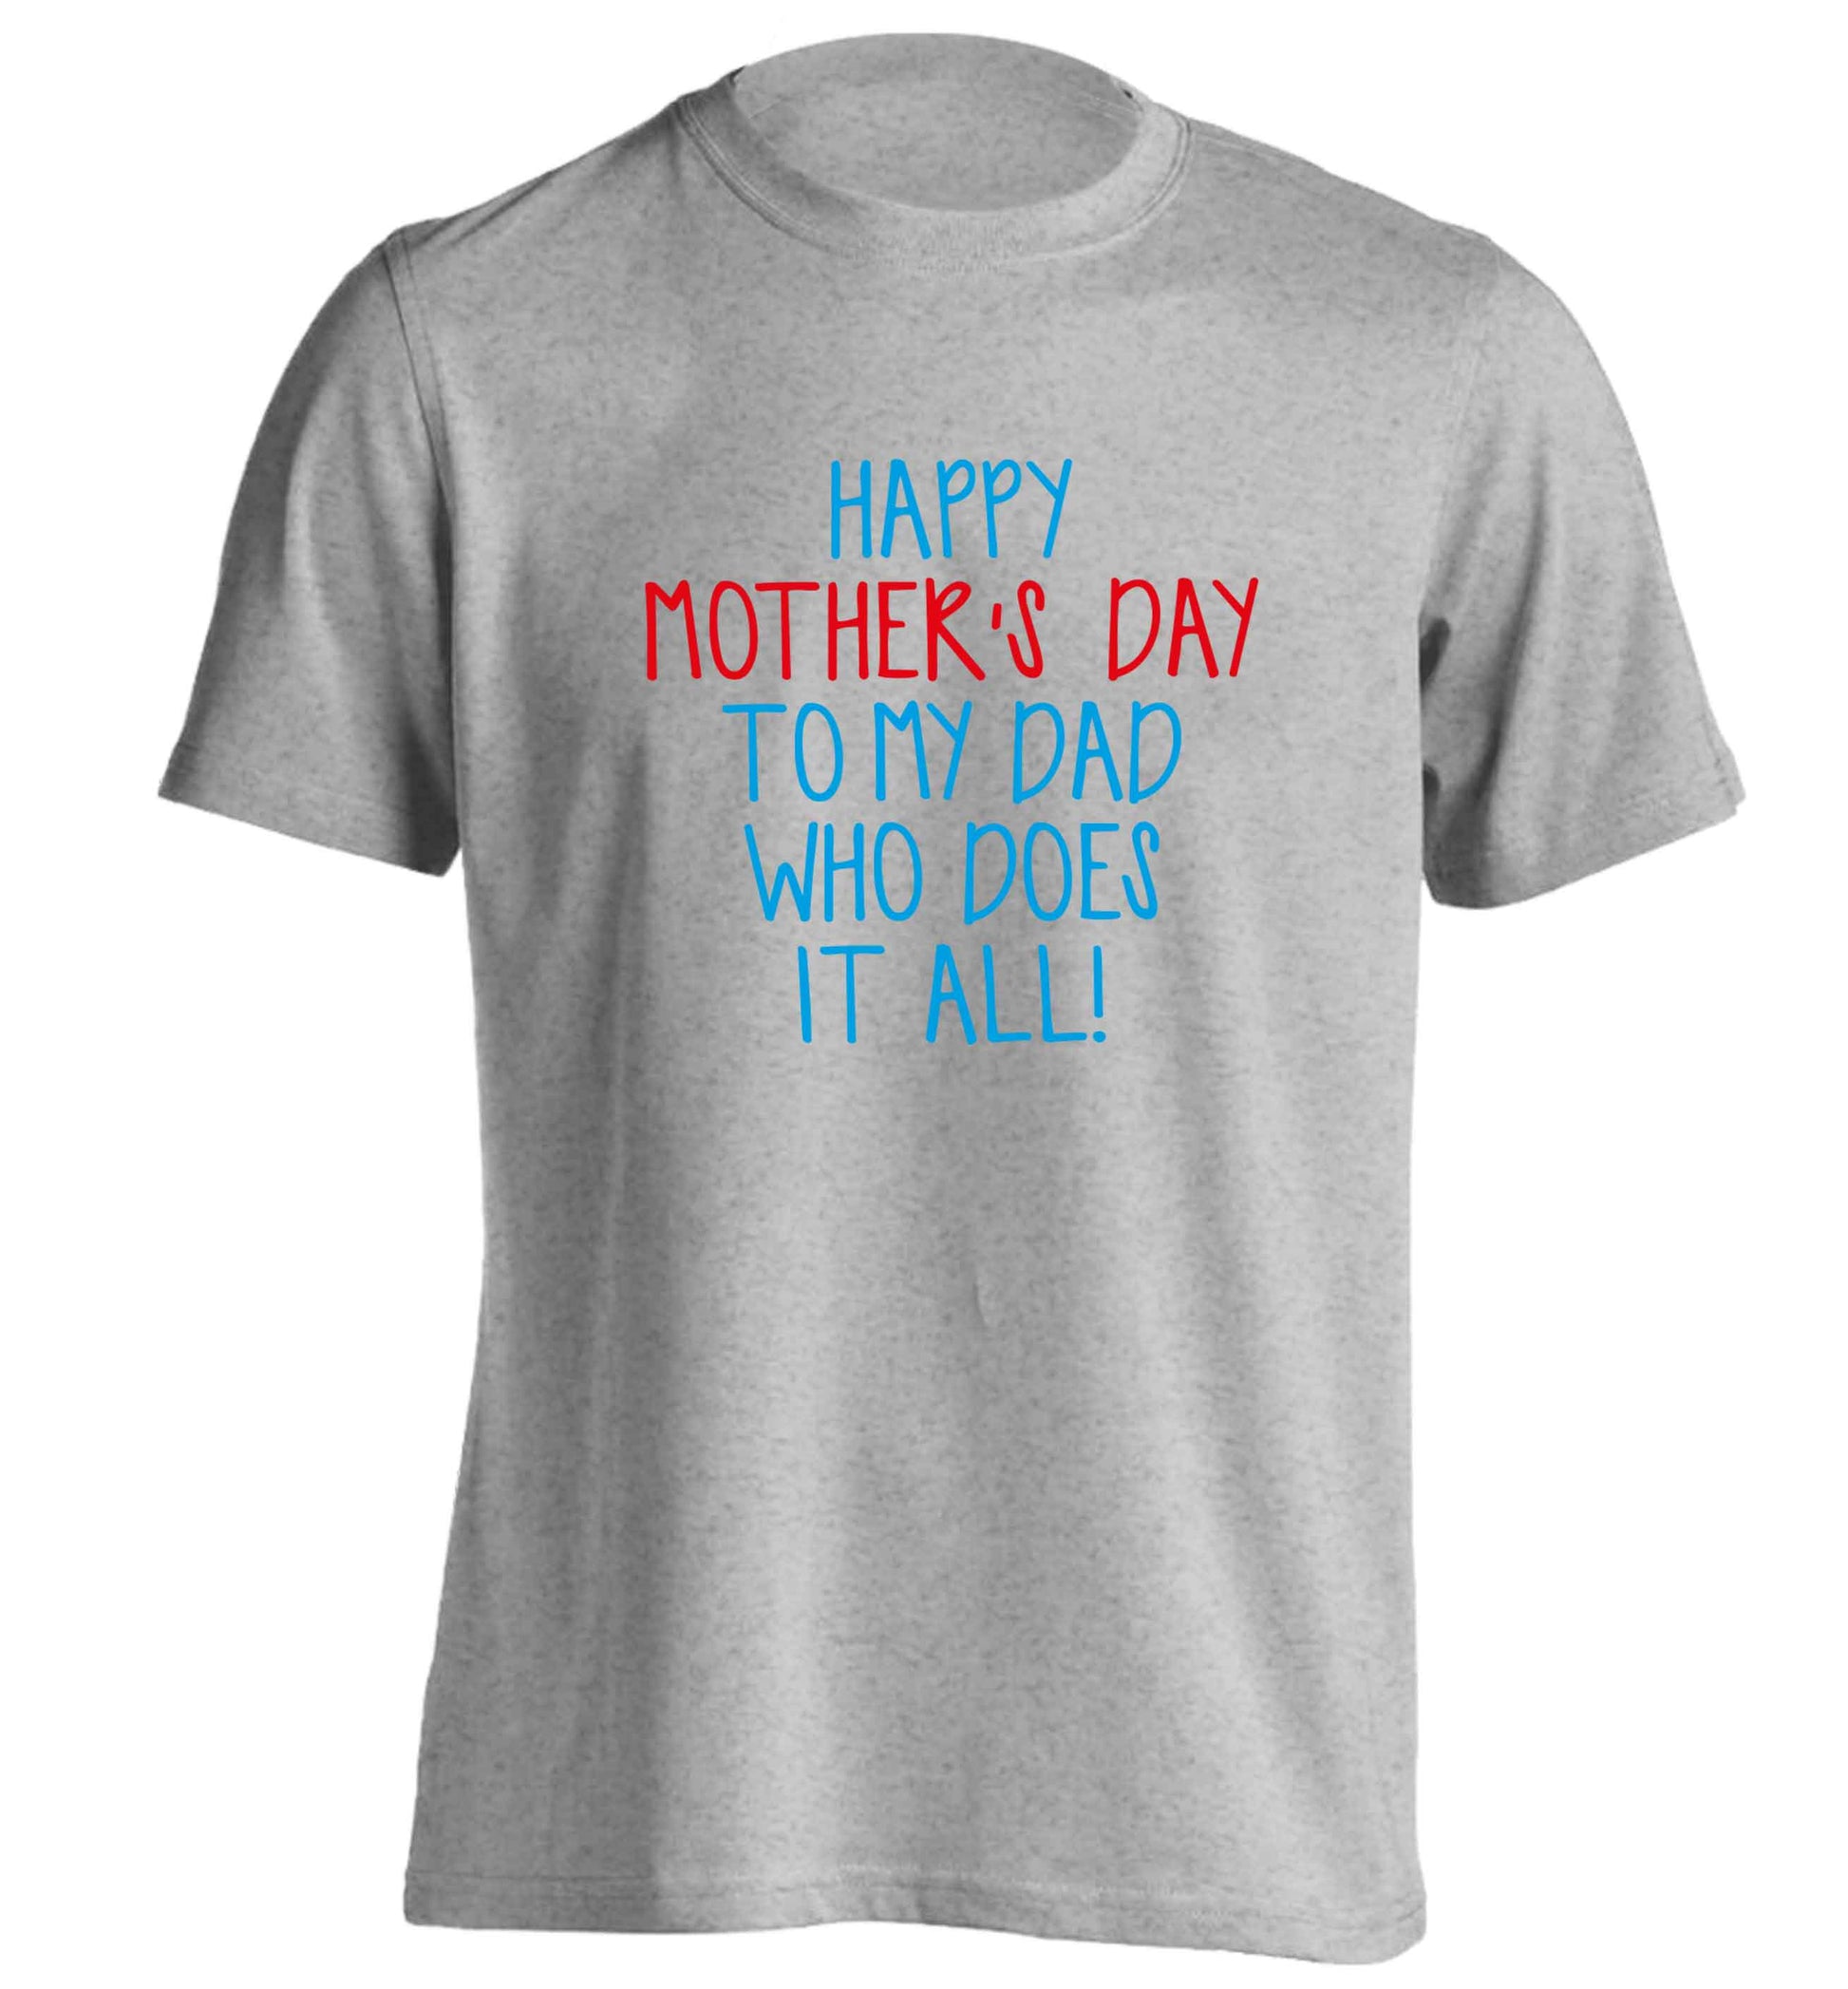 Happy mother's day to my dad who does it all! adults unisex grey Tshirt 2XL